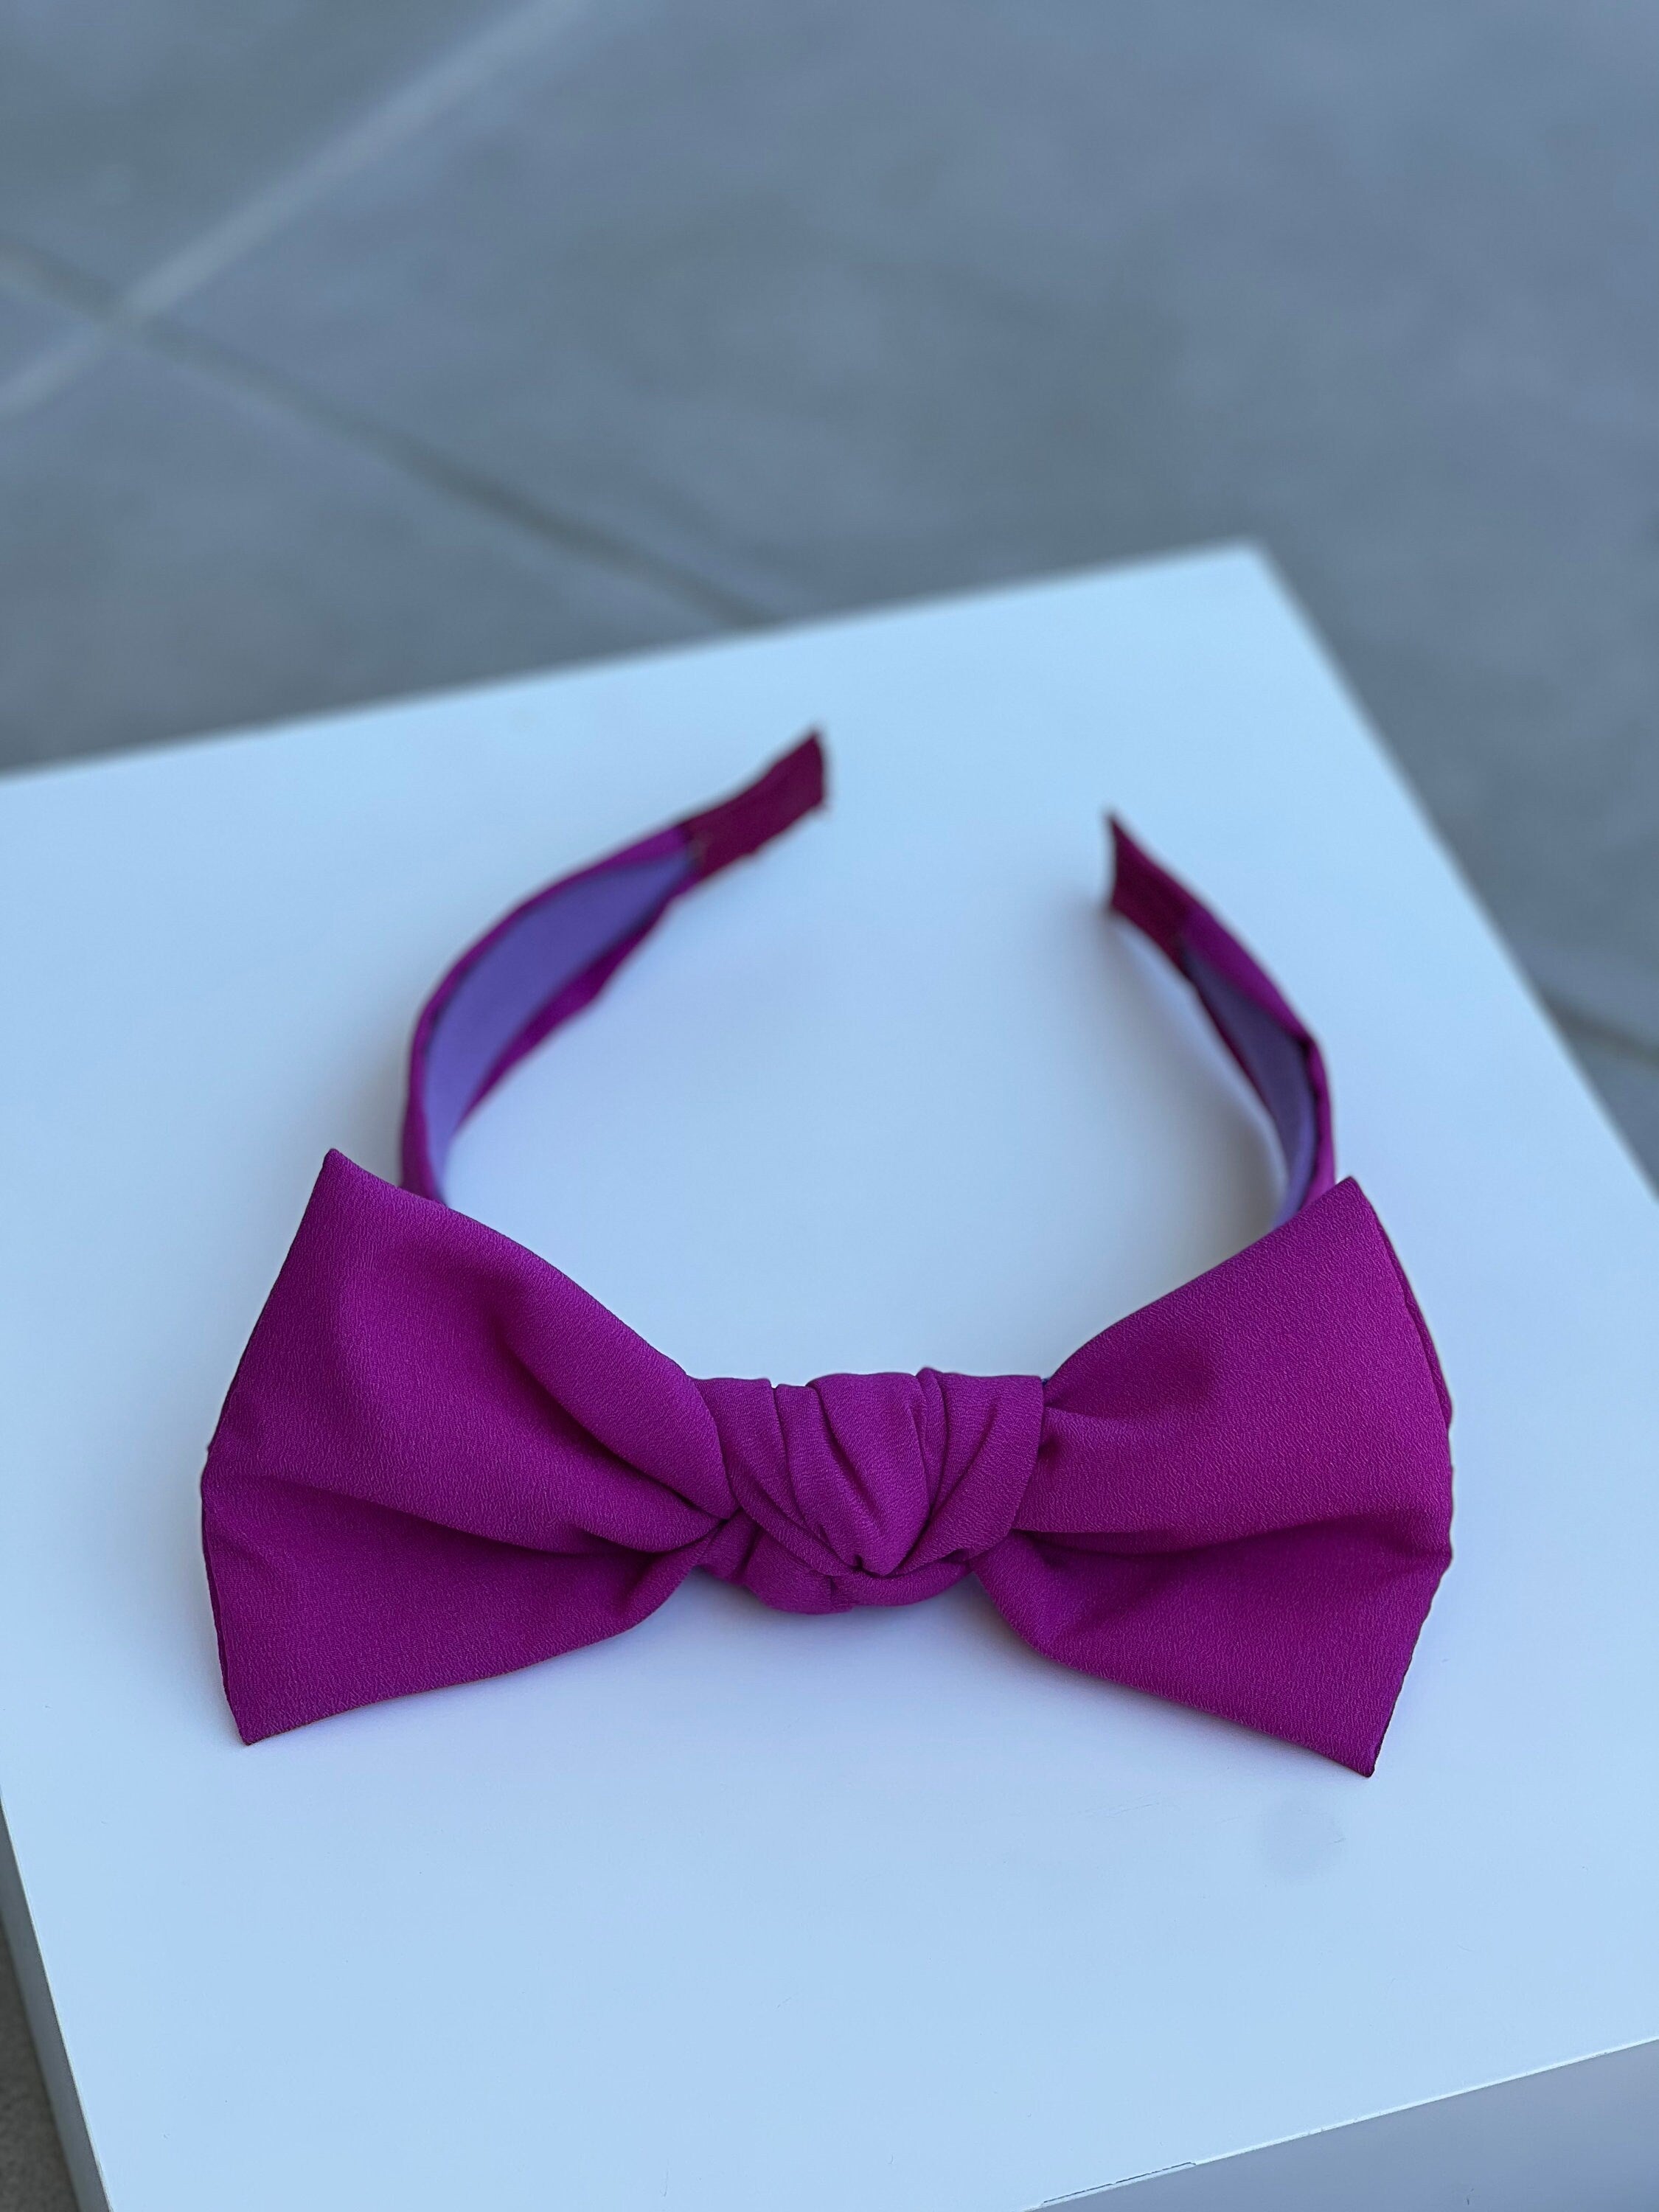 Stay stylish and comfortable with this classic fuschia tie headband